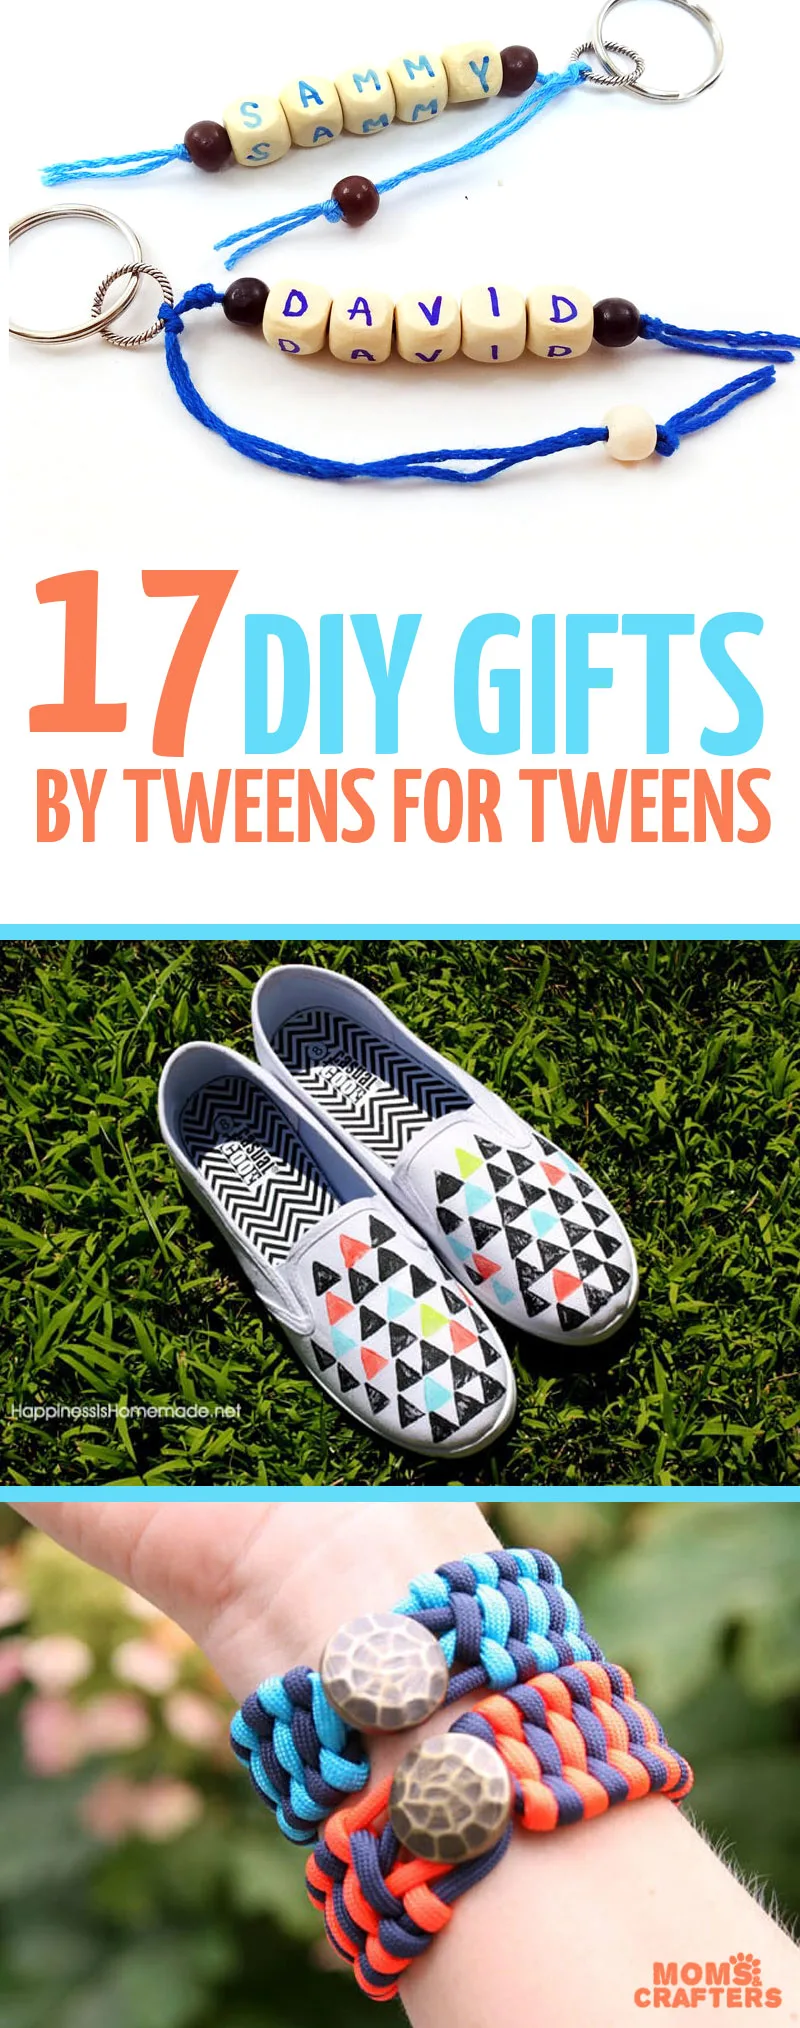 Click for 17 cool DIY gifts for tweens to make for other tweens!! These sweet DIY gift ideas for teens and tweens are easy to craft and perfect for Christmas and birthdays. #diygifts #teencrafts #teens